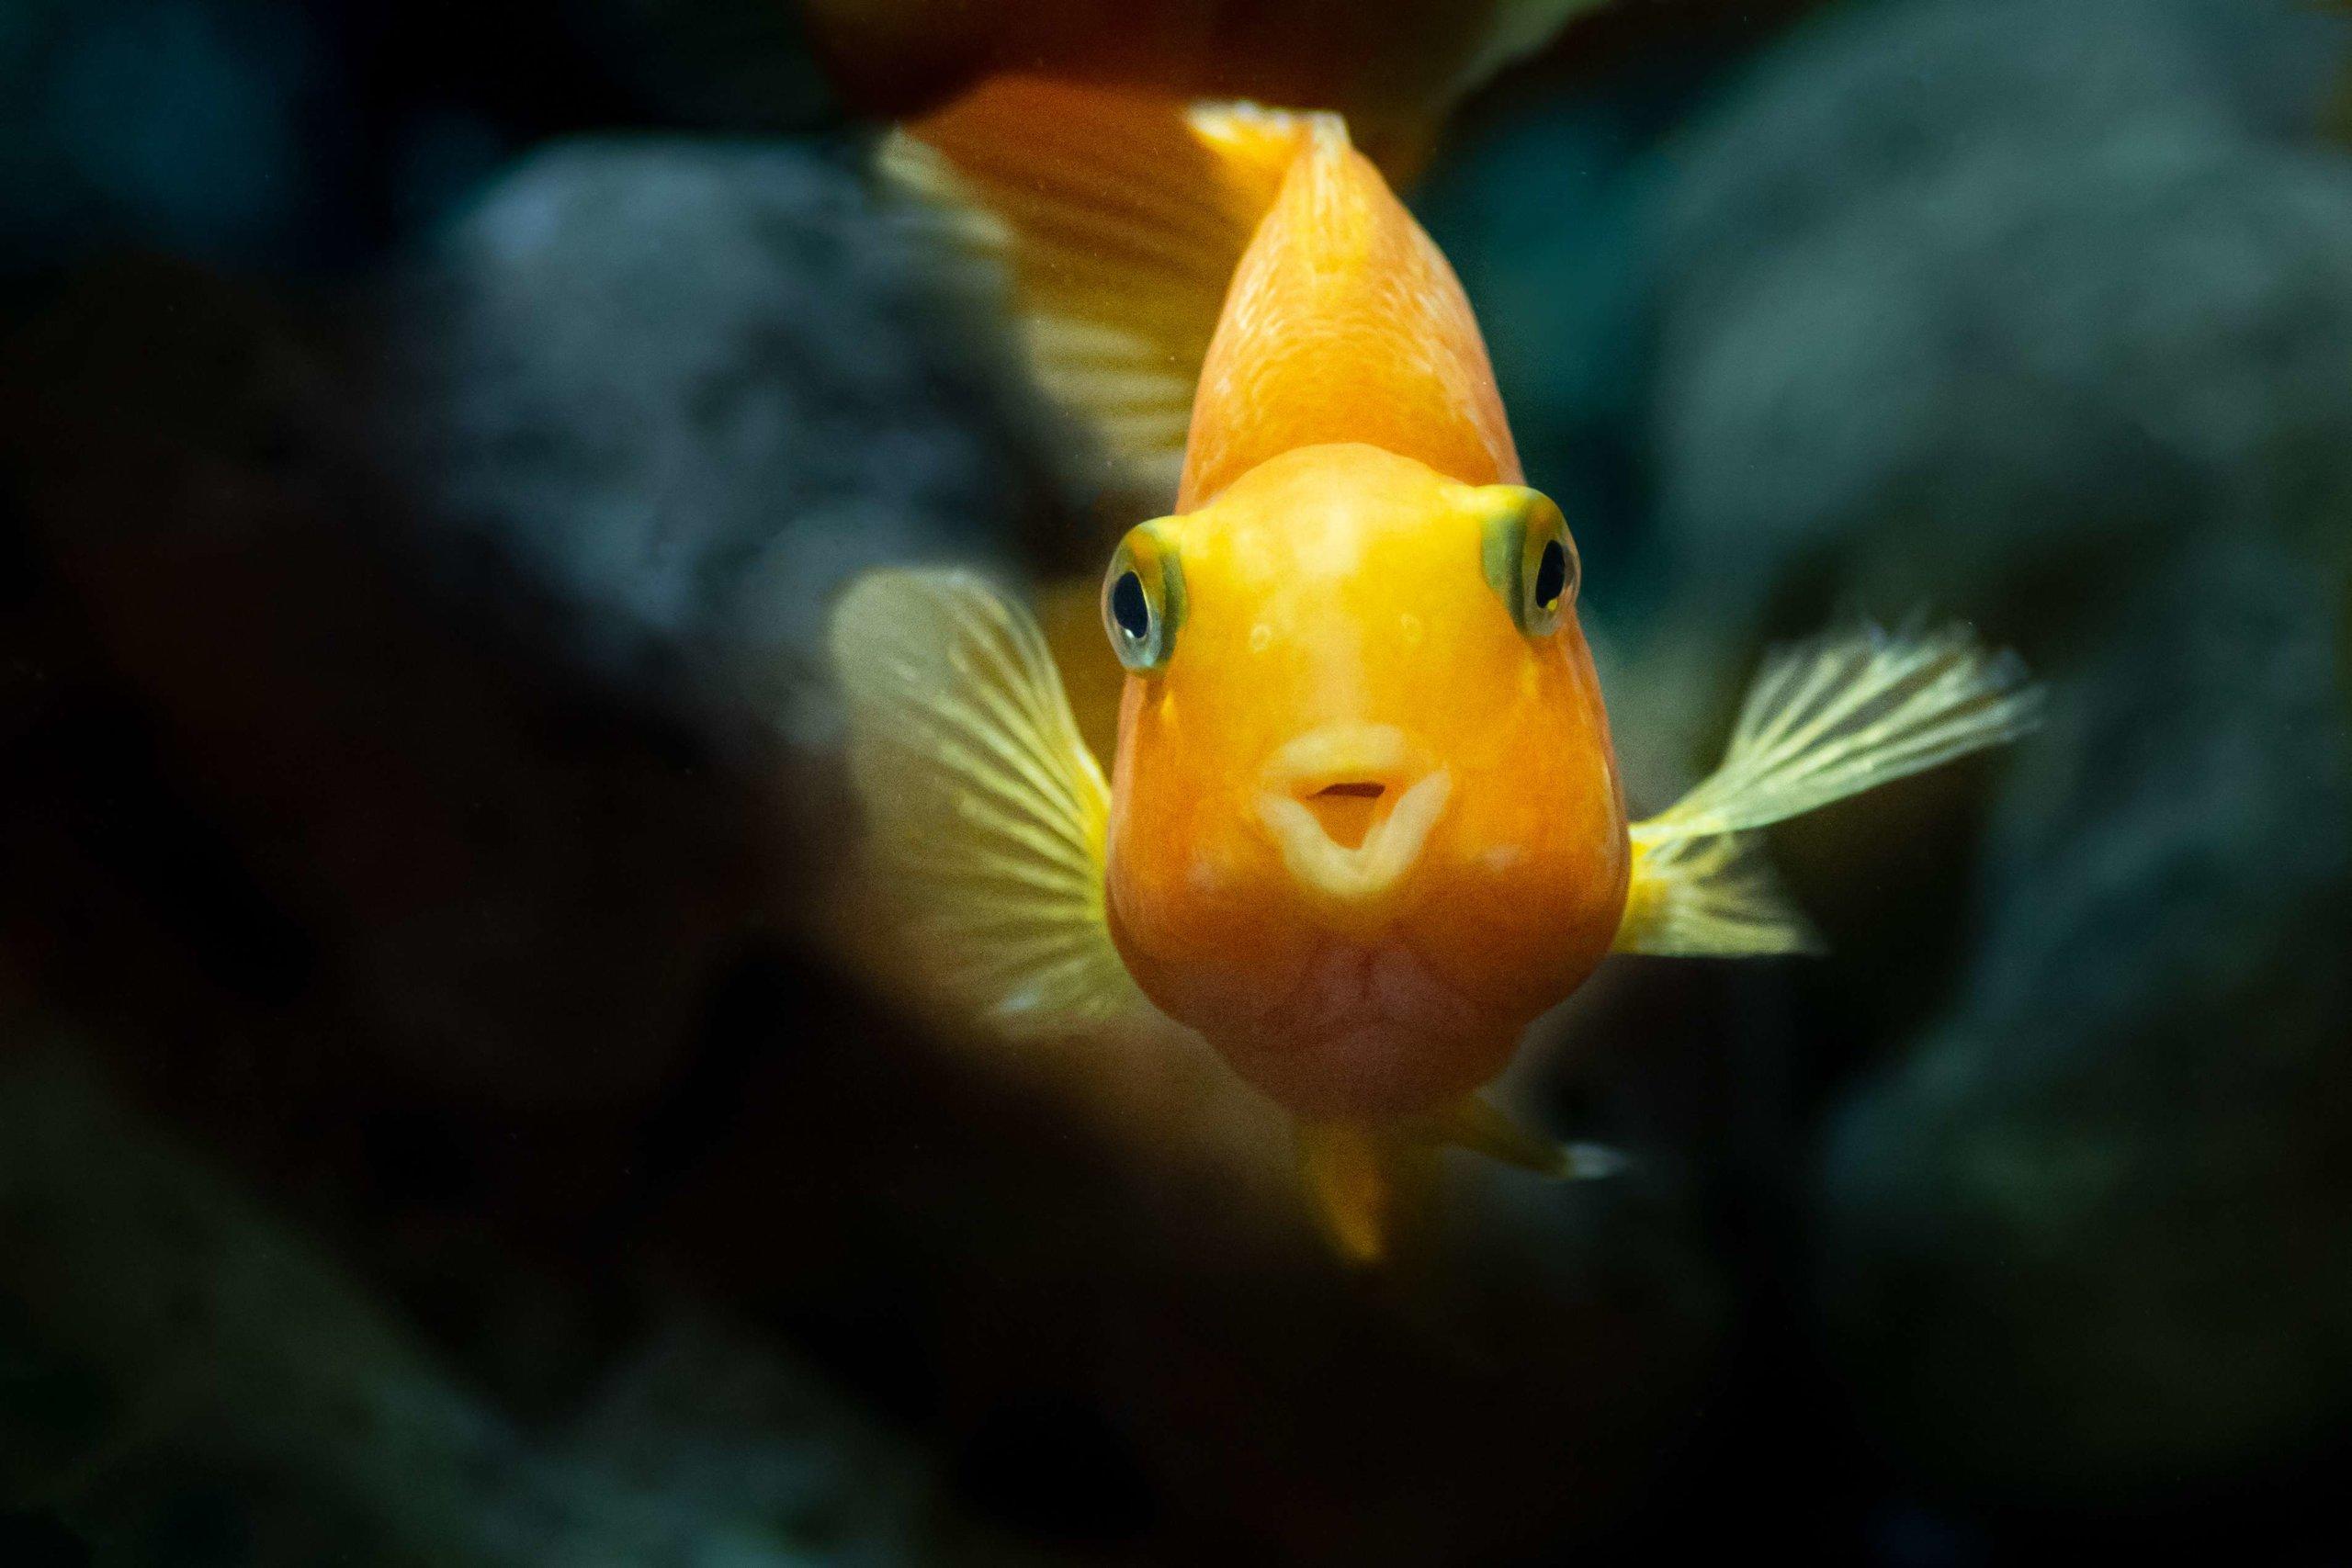 Yellow, orange goldfish, koi fish in a fishbowl looks at you and speaks something important. May all your wishes come true. Free space to enter custom text